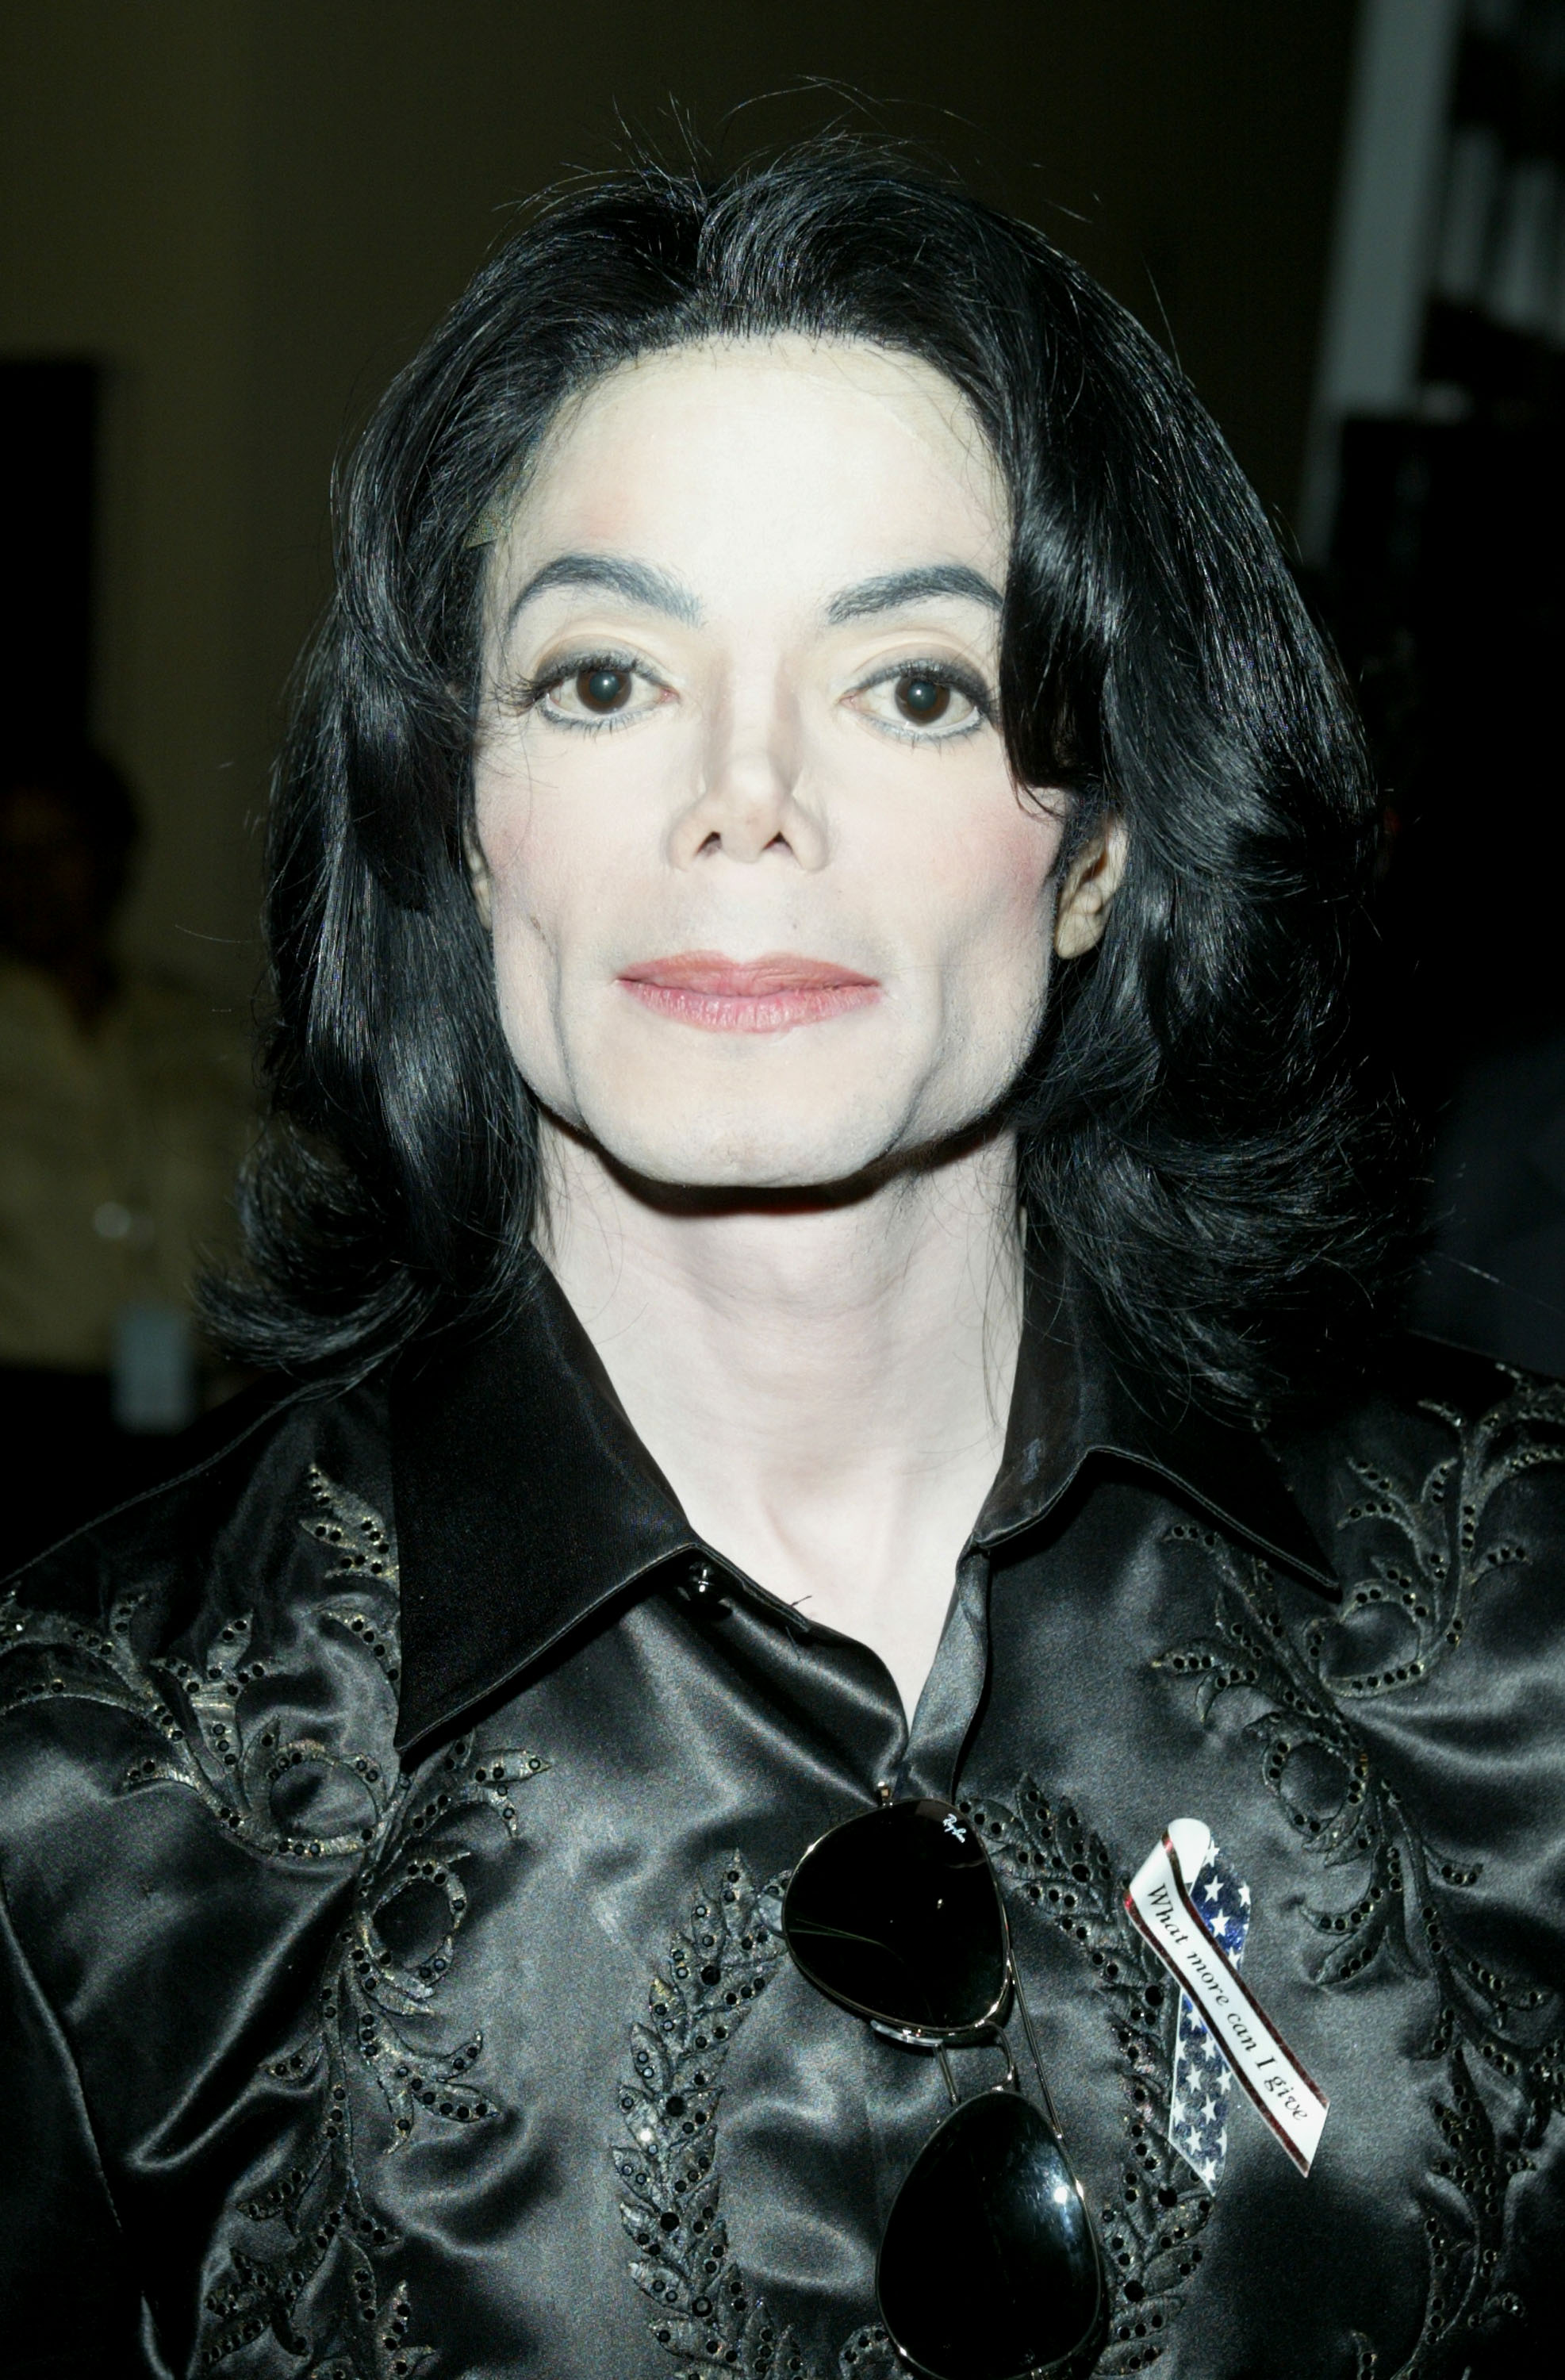 Michael Jackson at The 2003 Radio Music Awards on October 27, 2003 in Las Vegas, Nevada. | Source: Getty Images